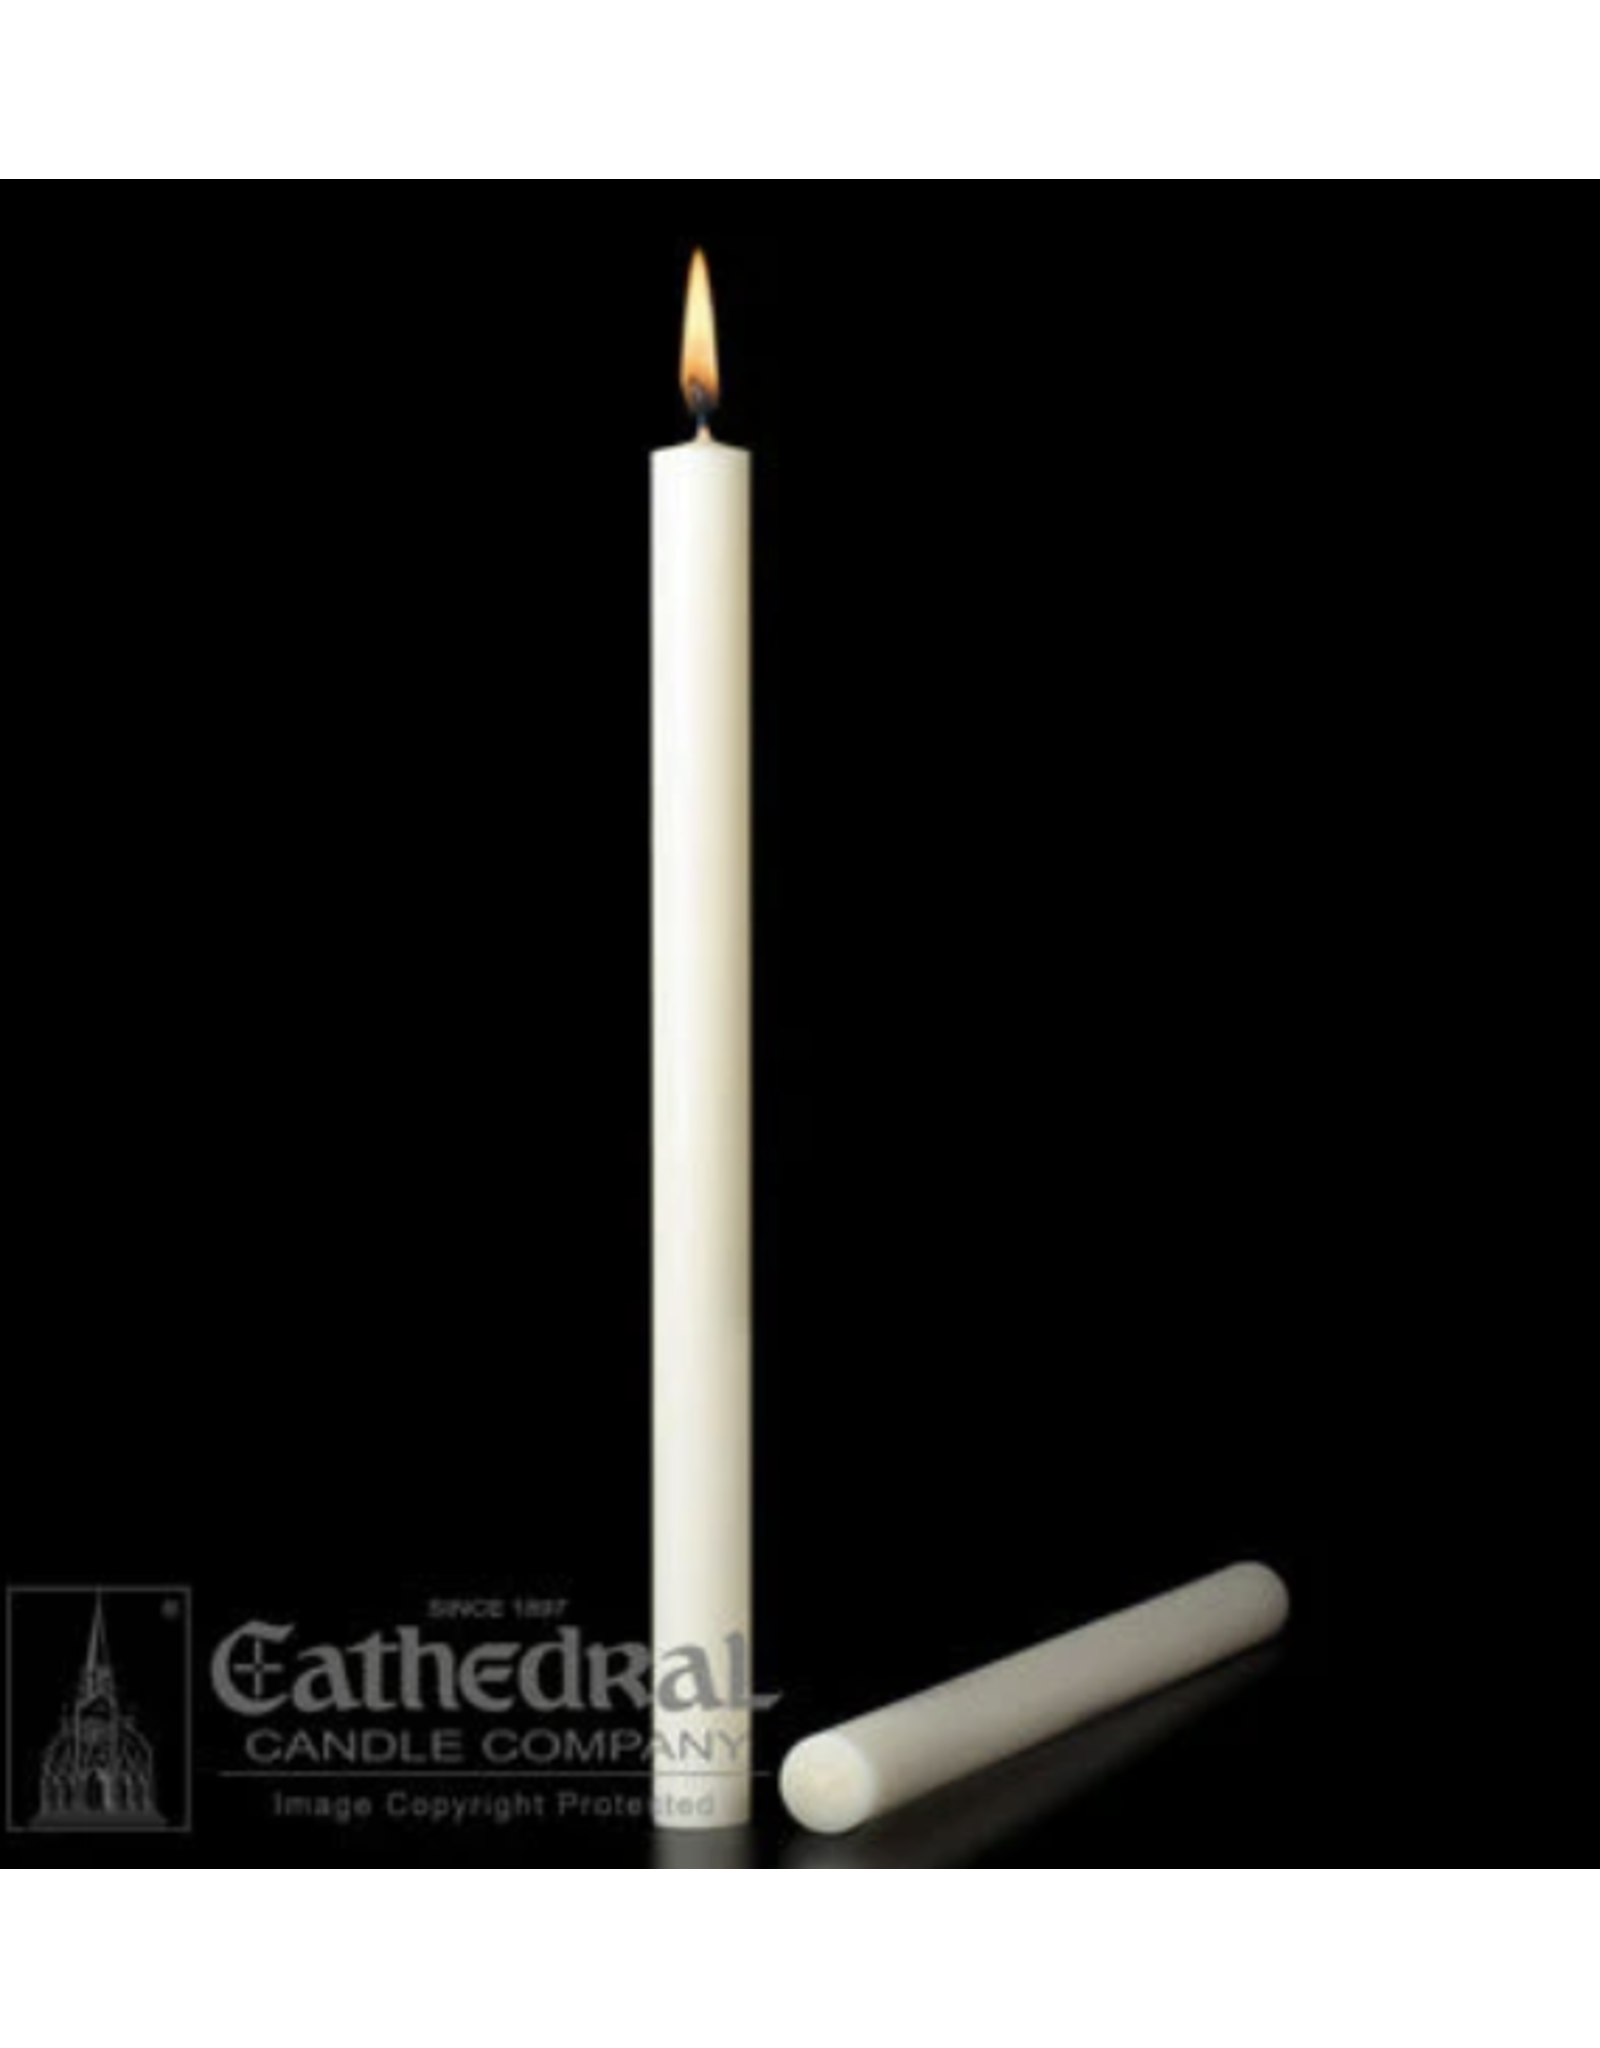 Cathedral Candle 51% Beeswax Altar Candles 1-1/16"x16-3/4" PE (12)